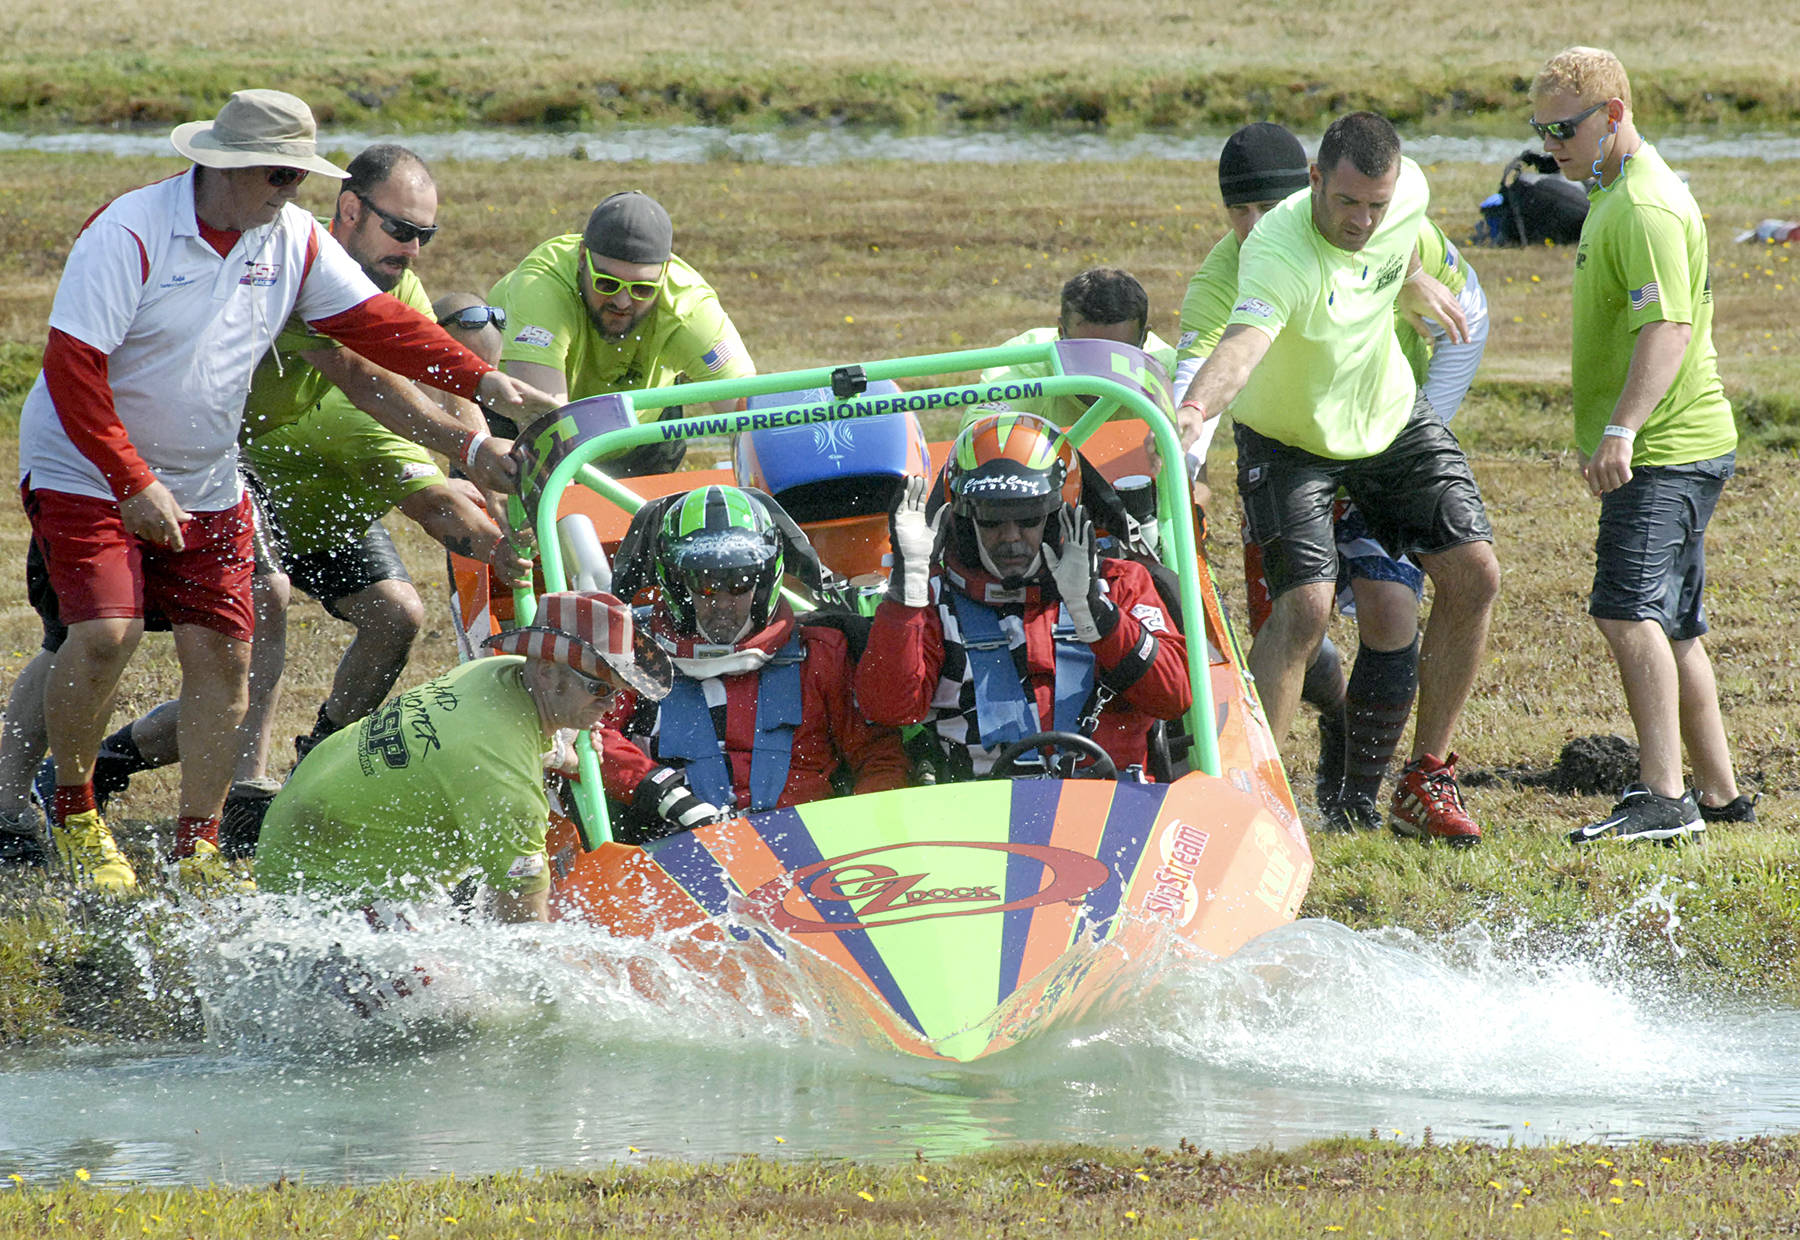 &lt;strong&gt;Keith Thorpe&lt;/strong&gt;/Peninsula Daily News                                Sprint boat “island hoppers” help to push the Showtime No. 5 boat back into the water after running aground during racing at the Extreme Sports Park in July.